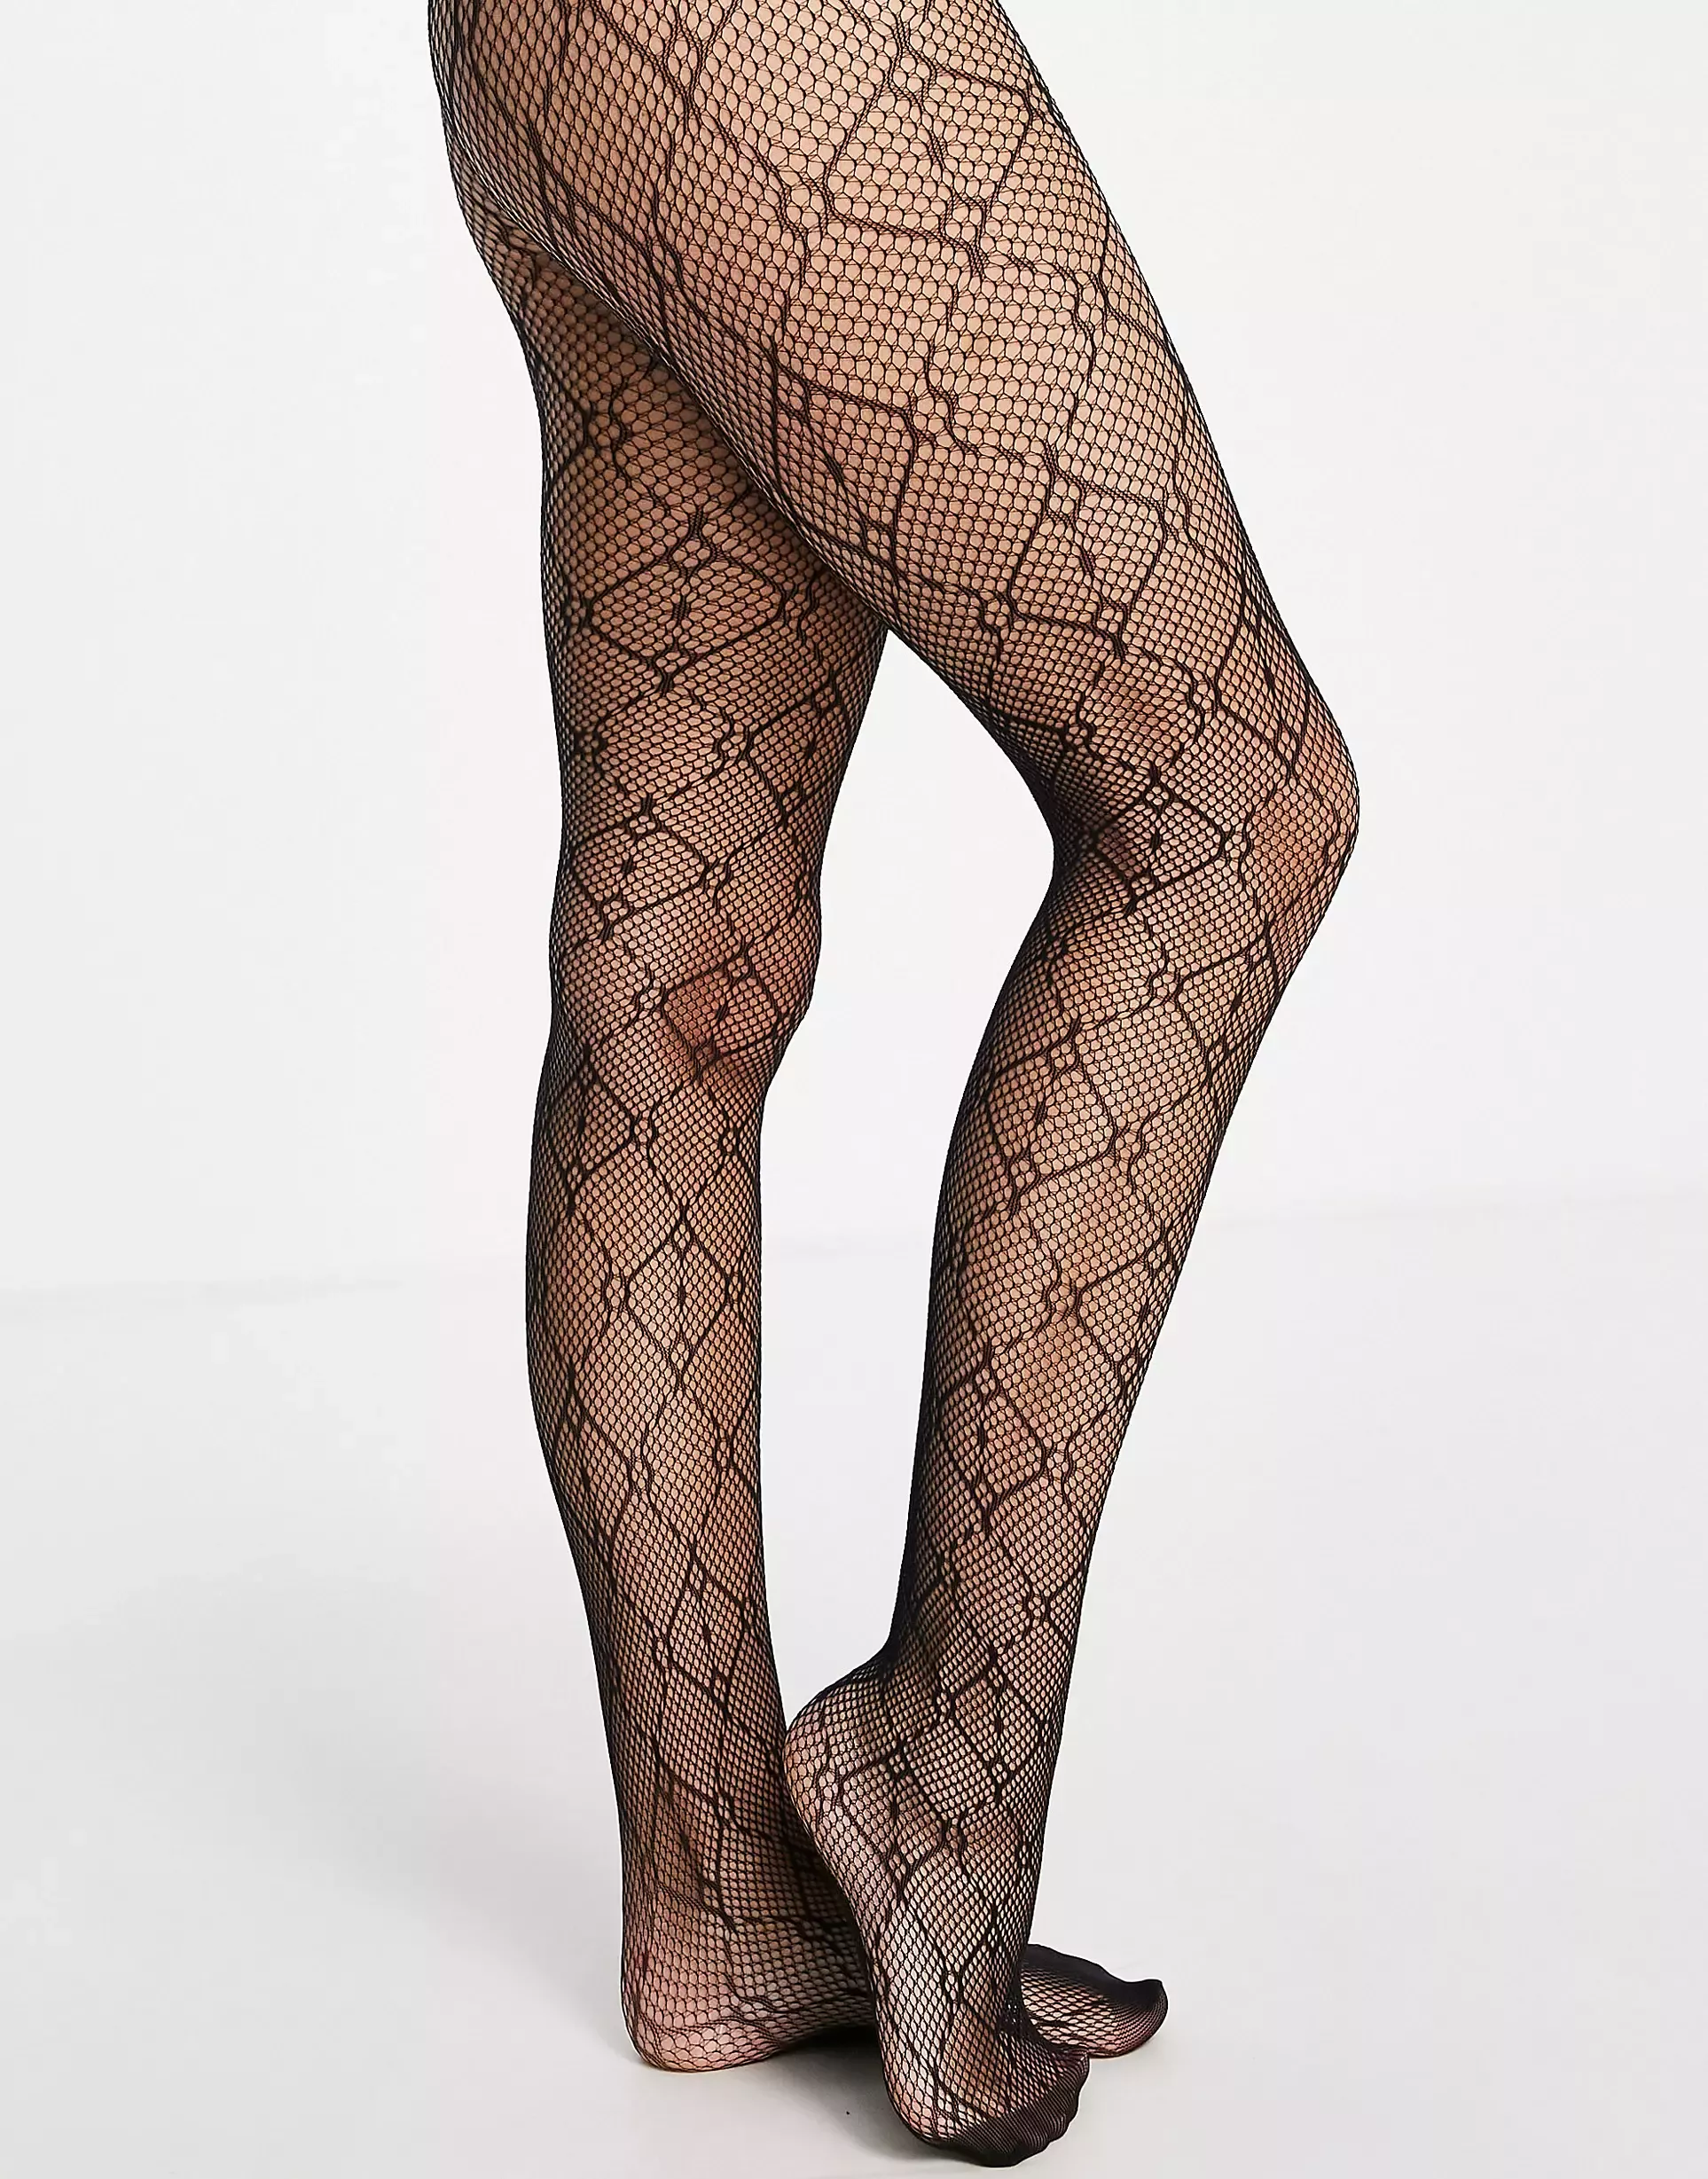 Kixies Kaylee hold-up stockings shimmering gray XL, 22,50 €